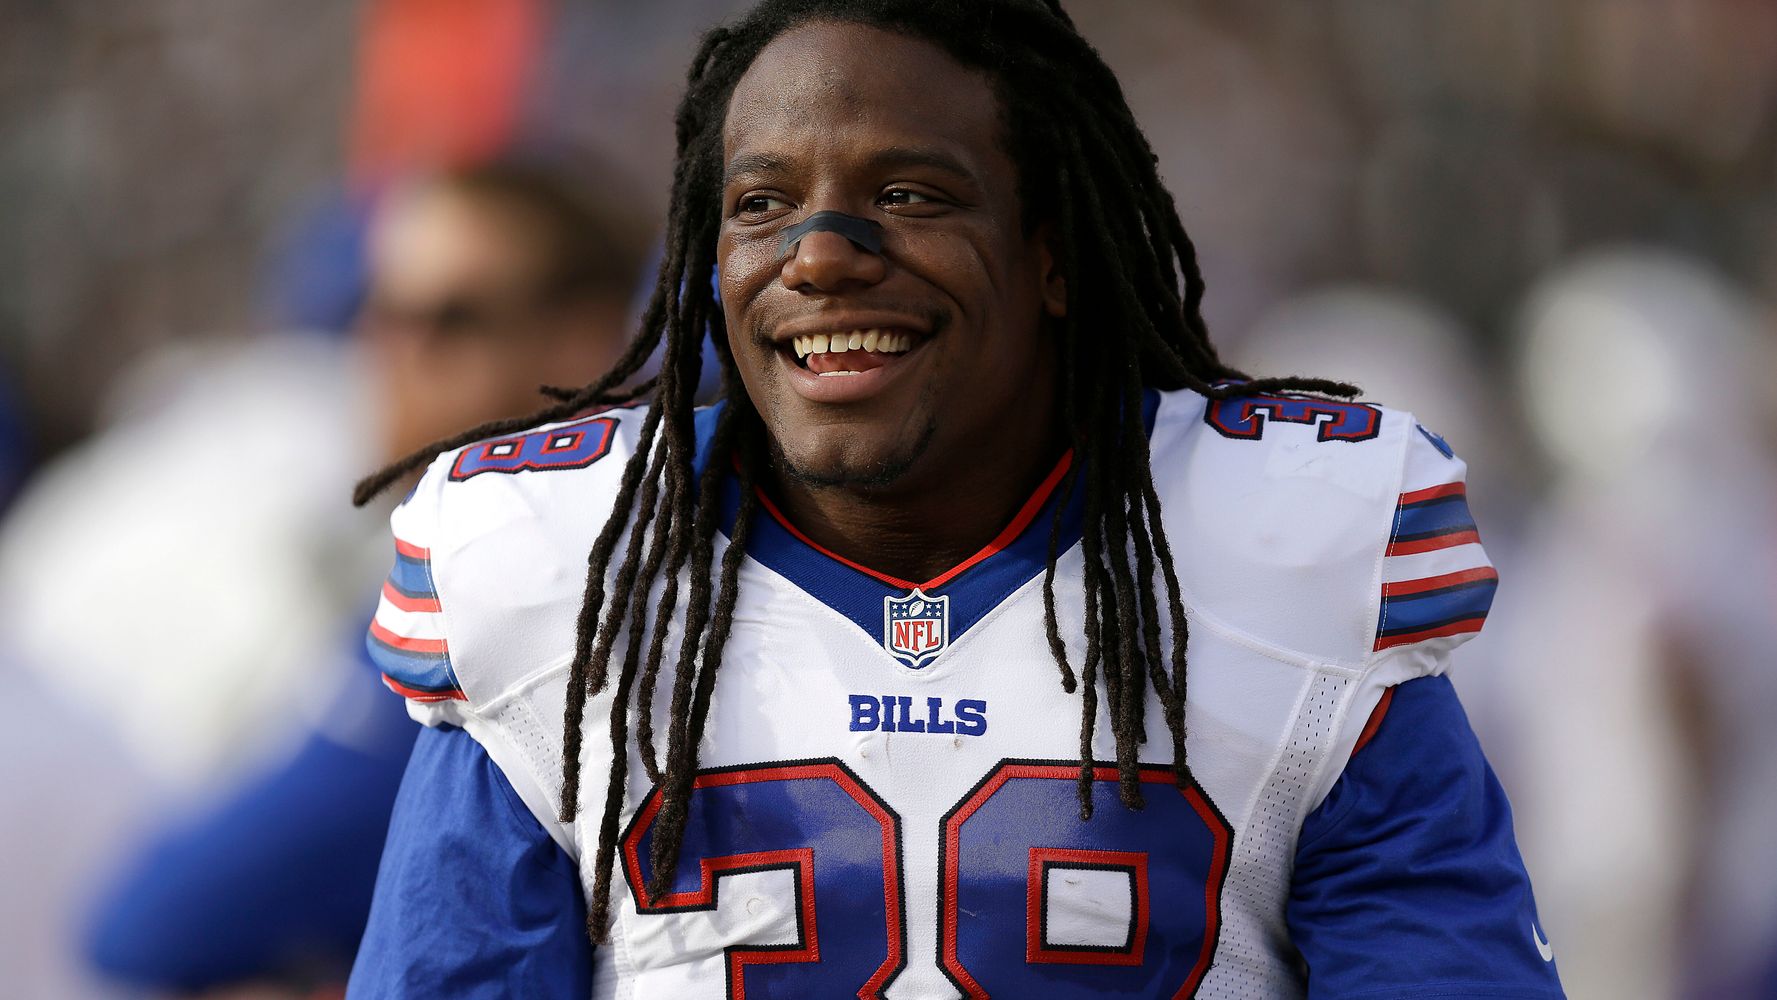 Former NFL Player Sergio Brown Arrested After Mother’s Death, Faces First-Degree Murder Charges